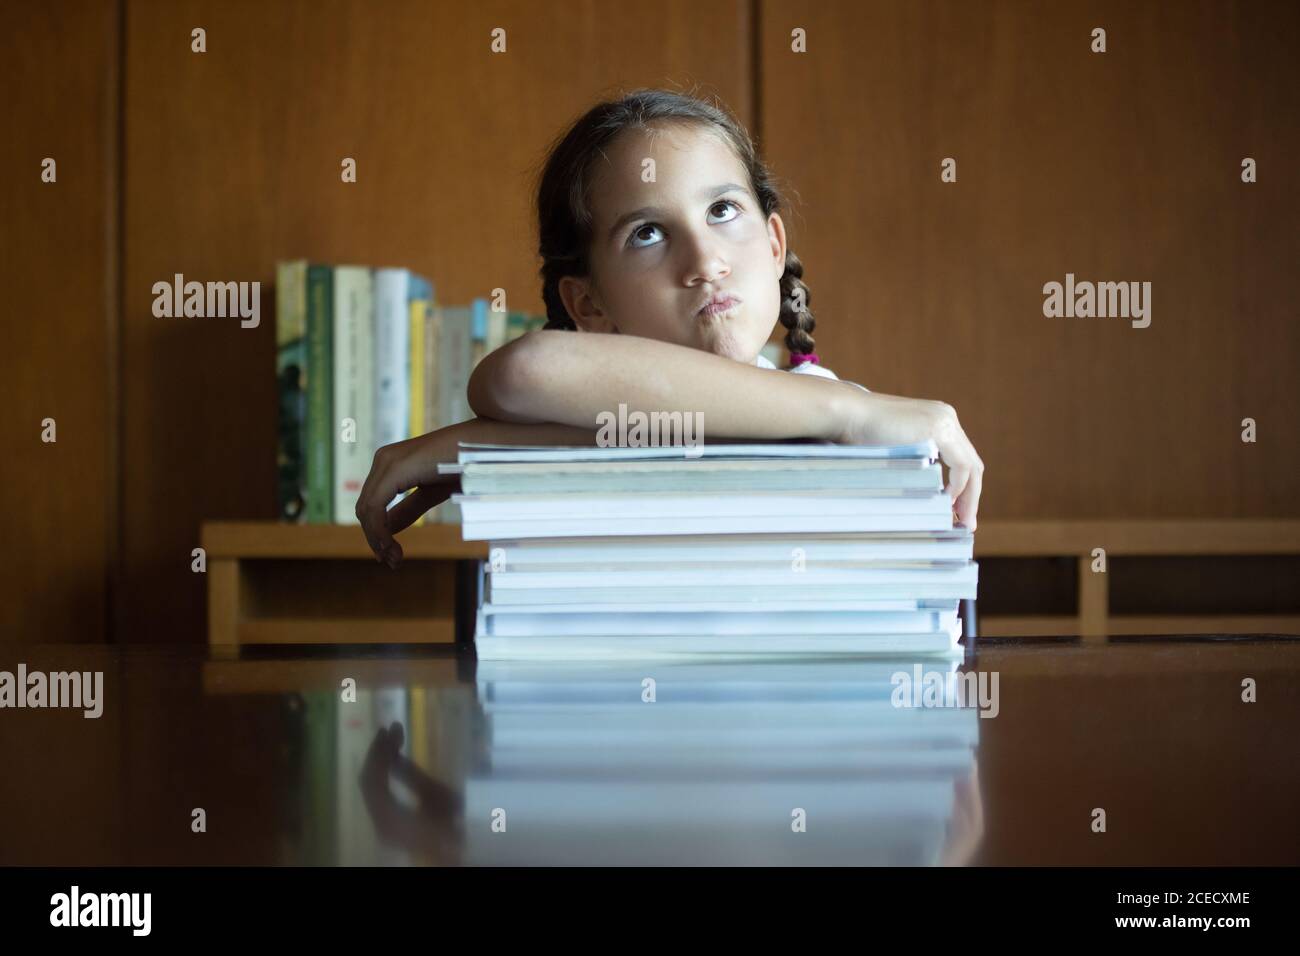 student girl at home unhappy with the amount of homework they have given her at school Stock Photo